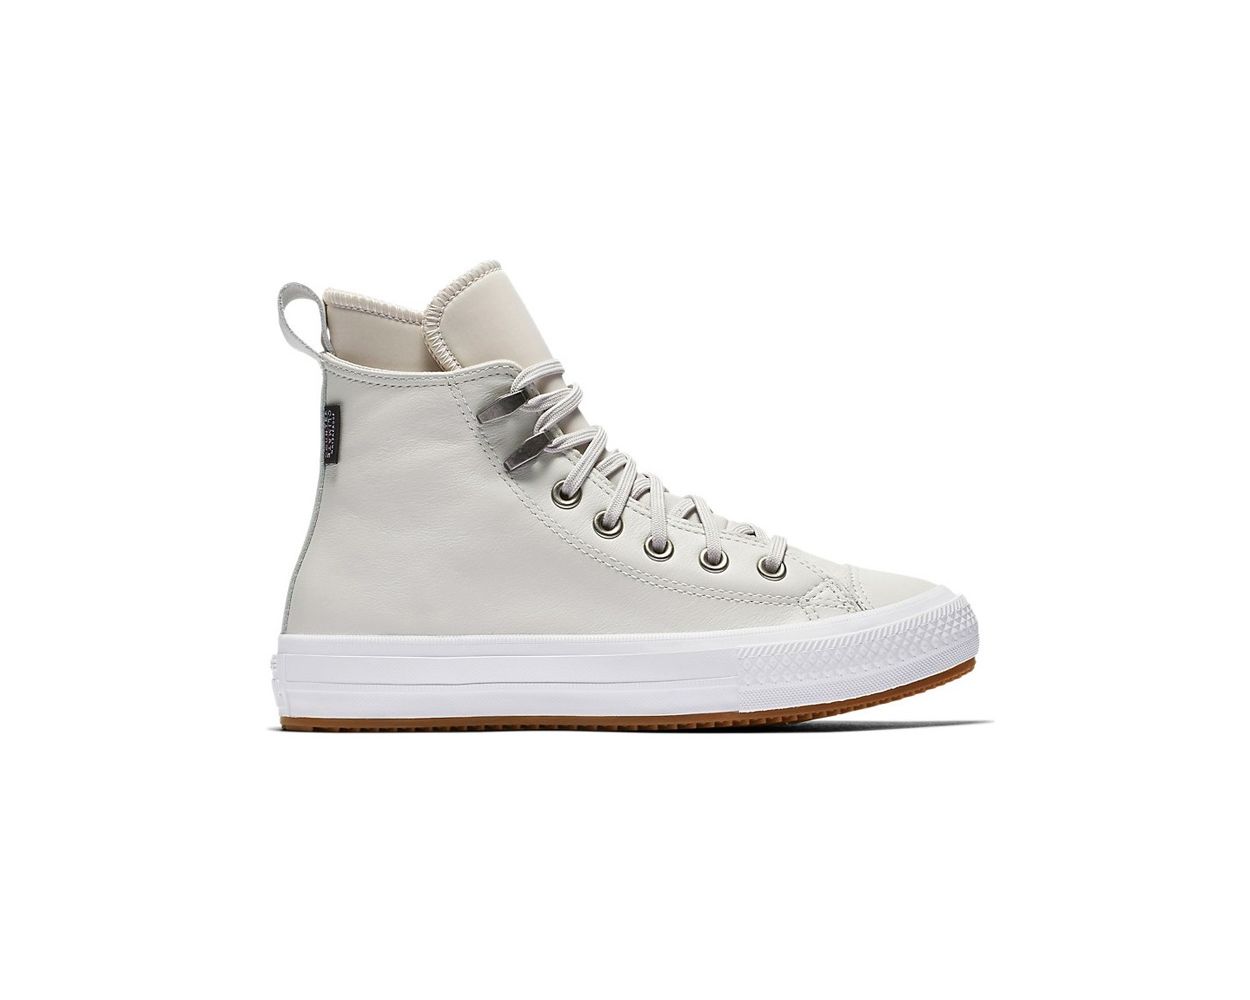 Indomitable Bermad drawer Converse Chuck Taylor All Star Waterproof Boot Leather High Top in Pale  Putty/White/White | NEON